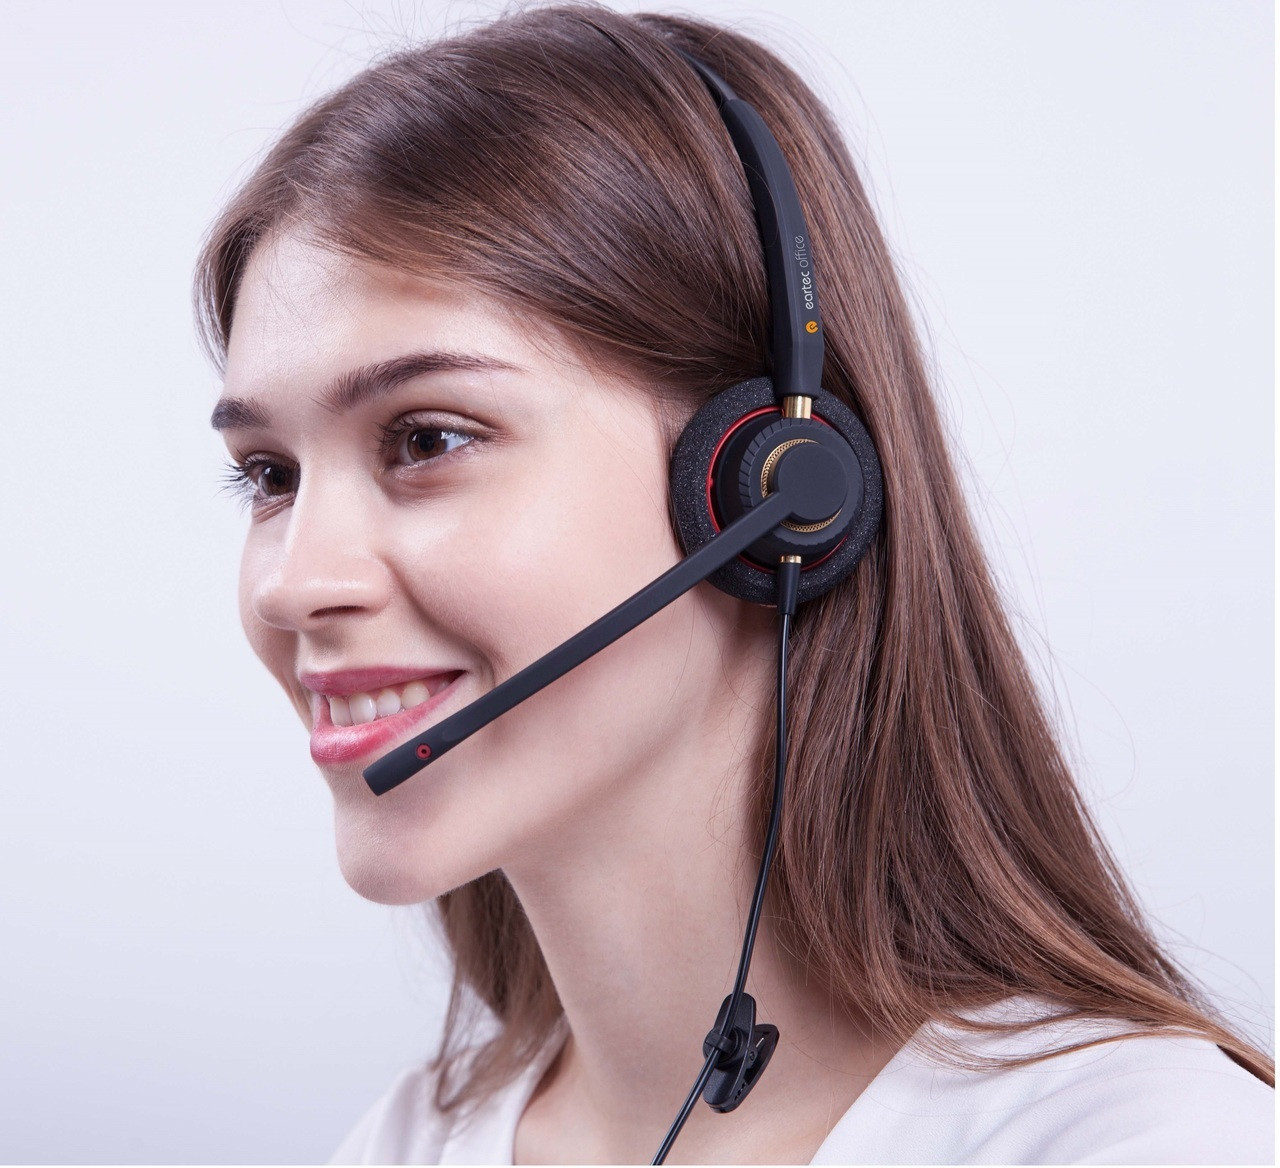 Aastra 135 Pro Dect Phone Headset - EAR510